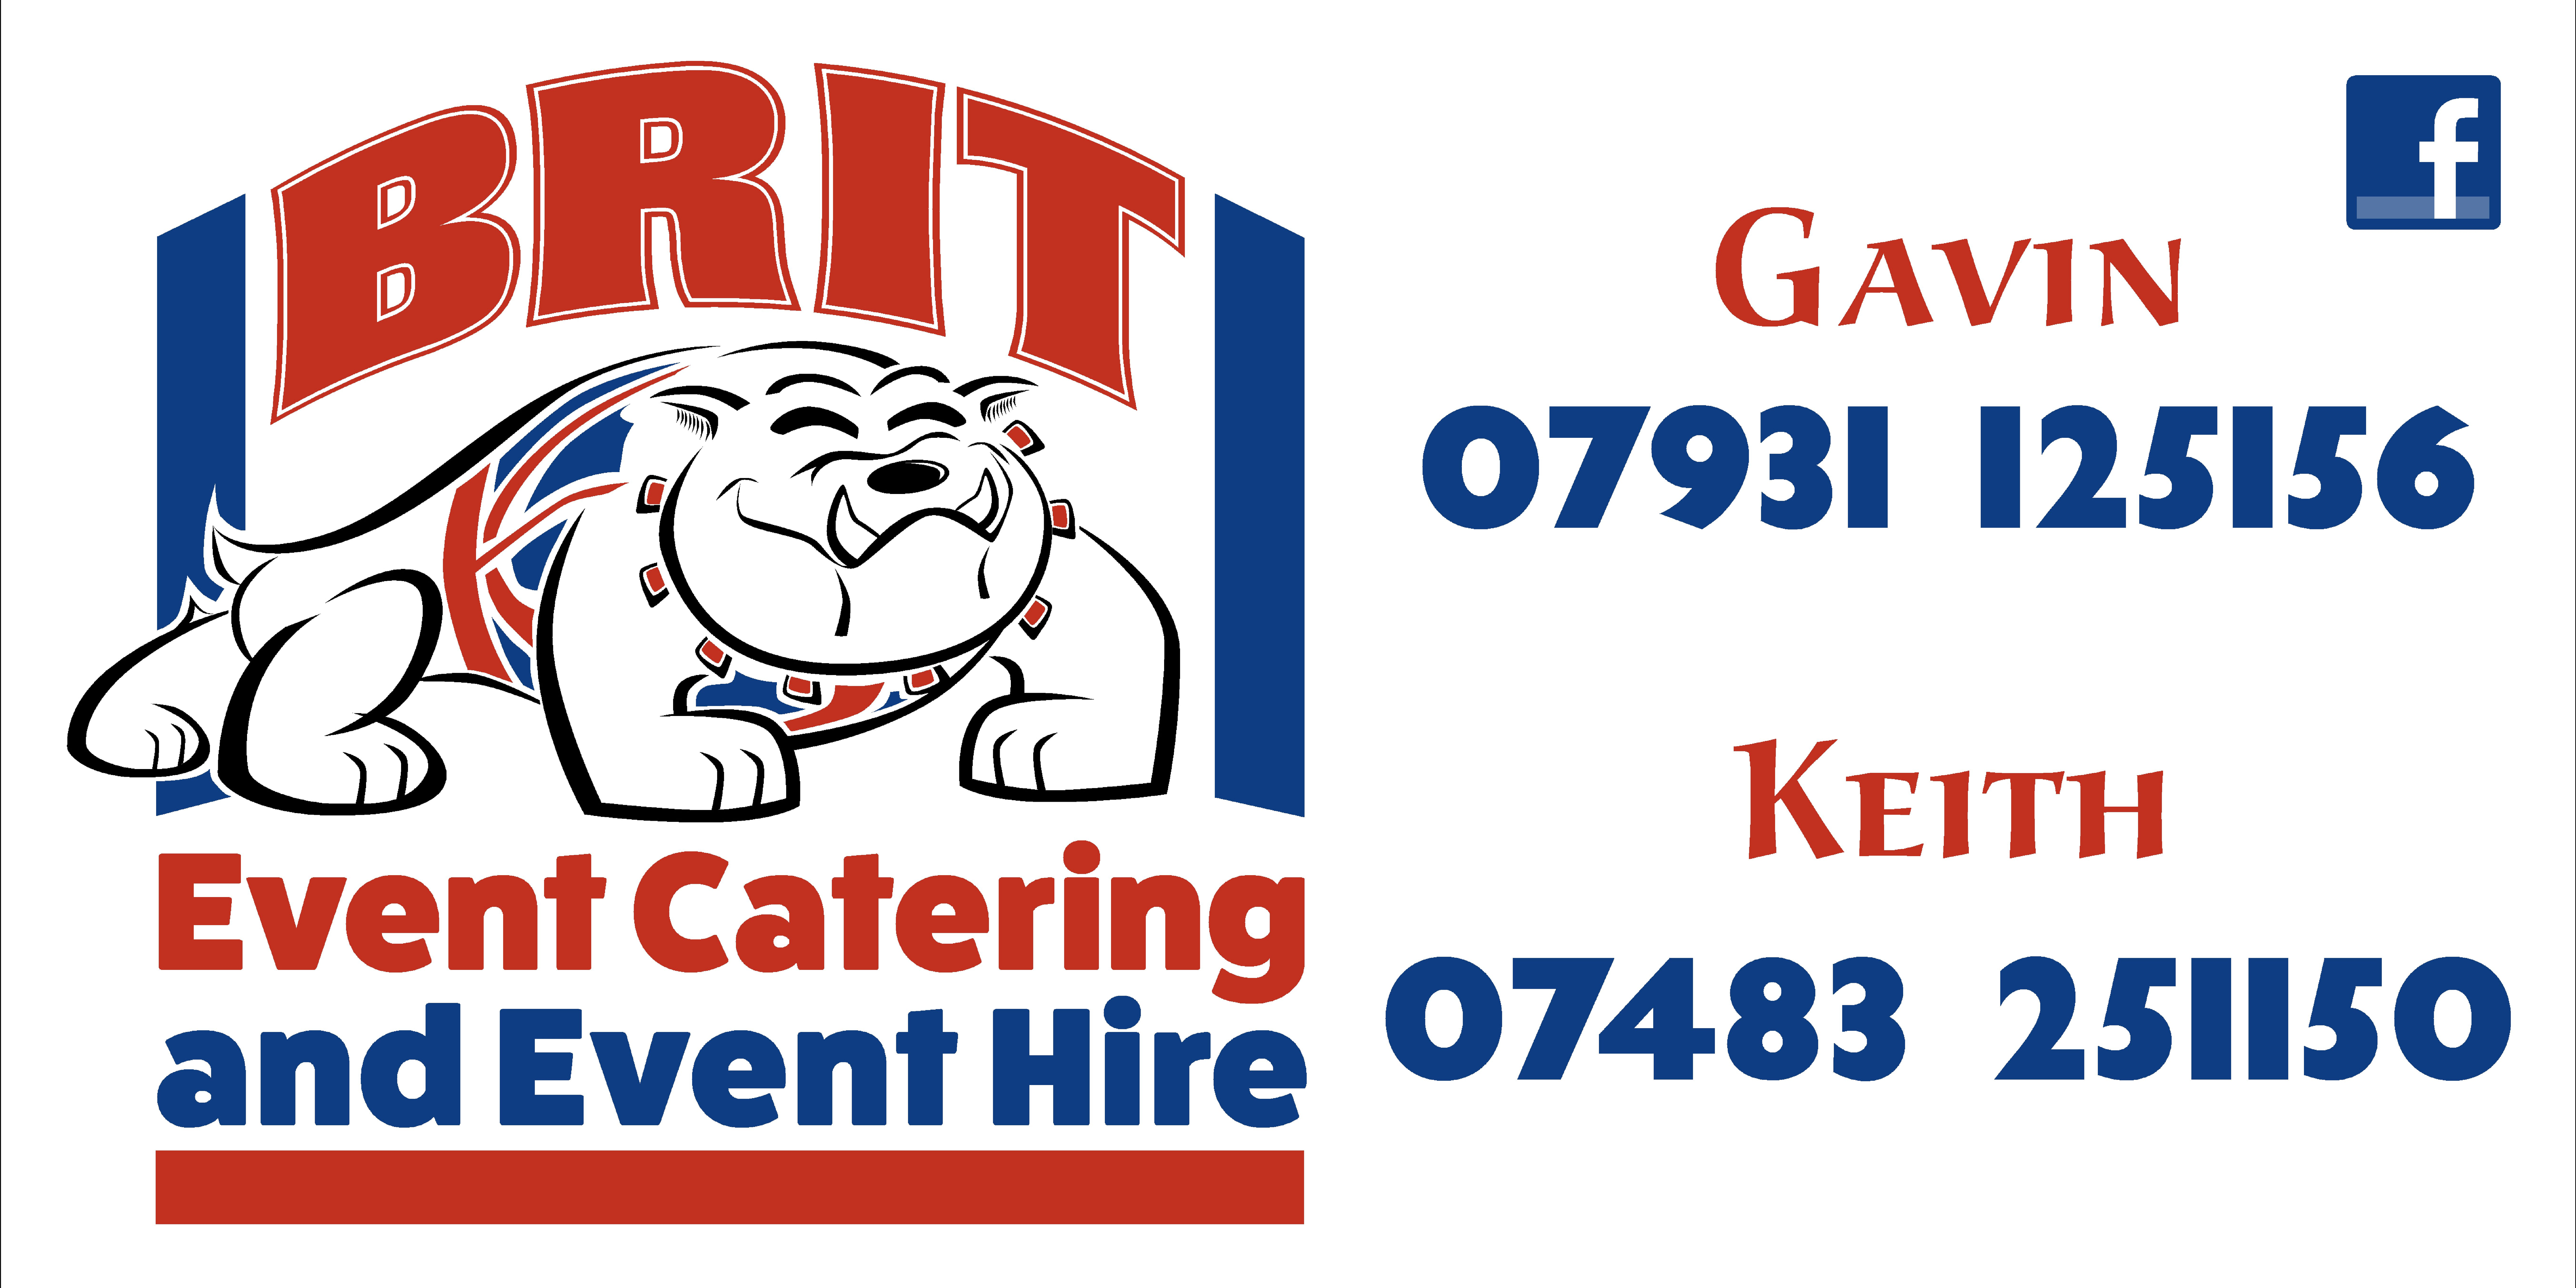 BRIT EVENT CATERING AND EVENTS HIRE